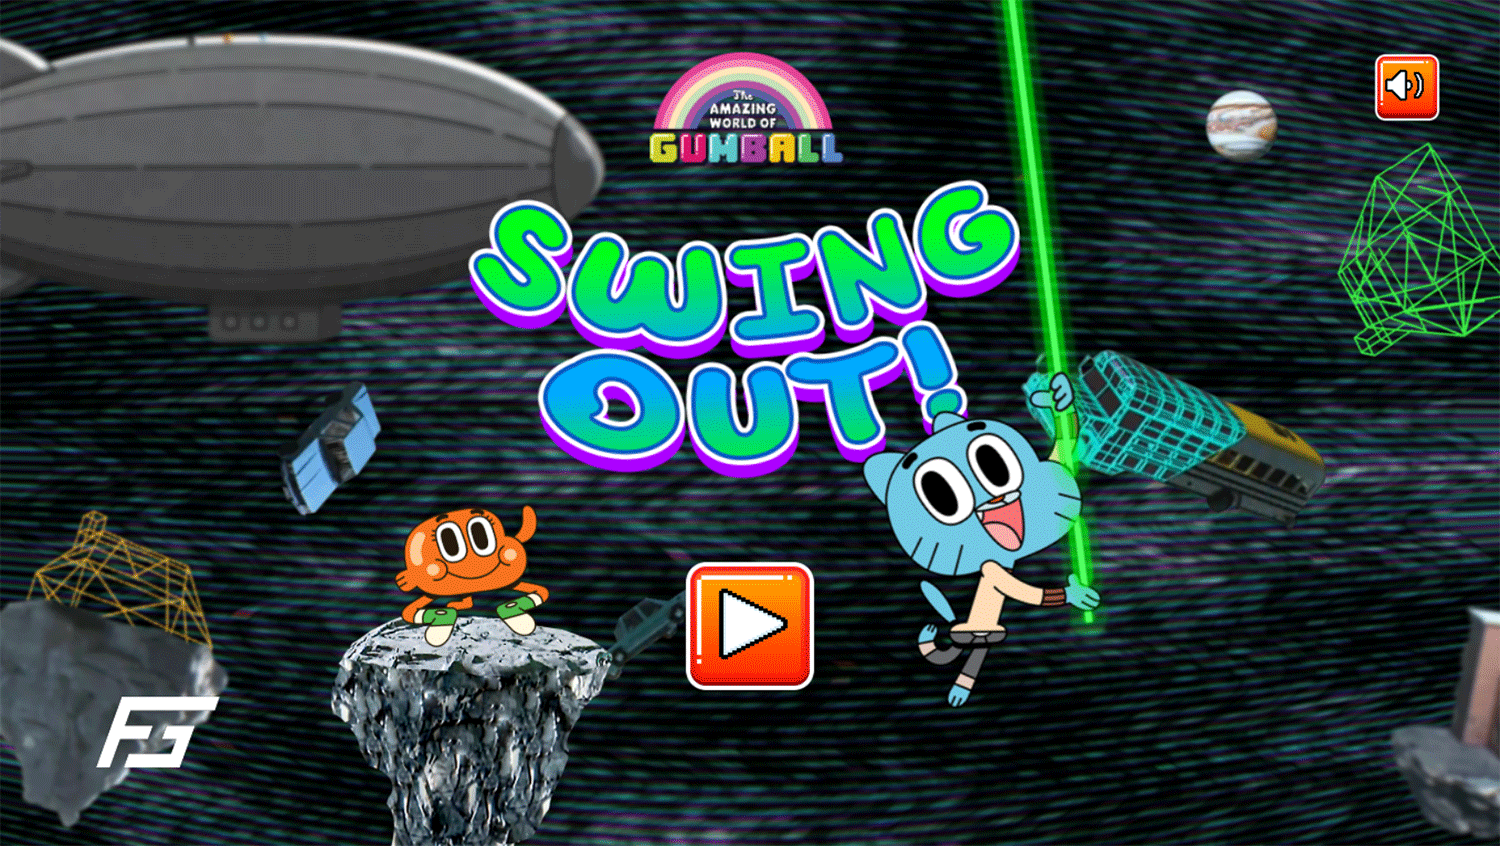 Amazing World of Gumball Swing Out Game Welcome Screen Screenshot.